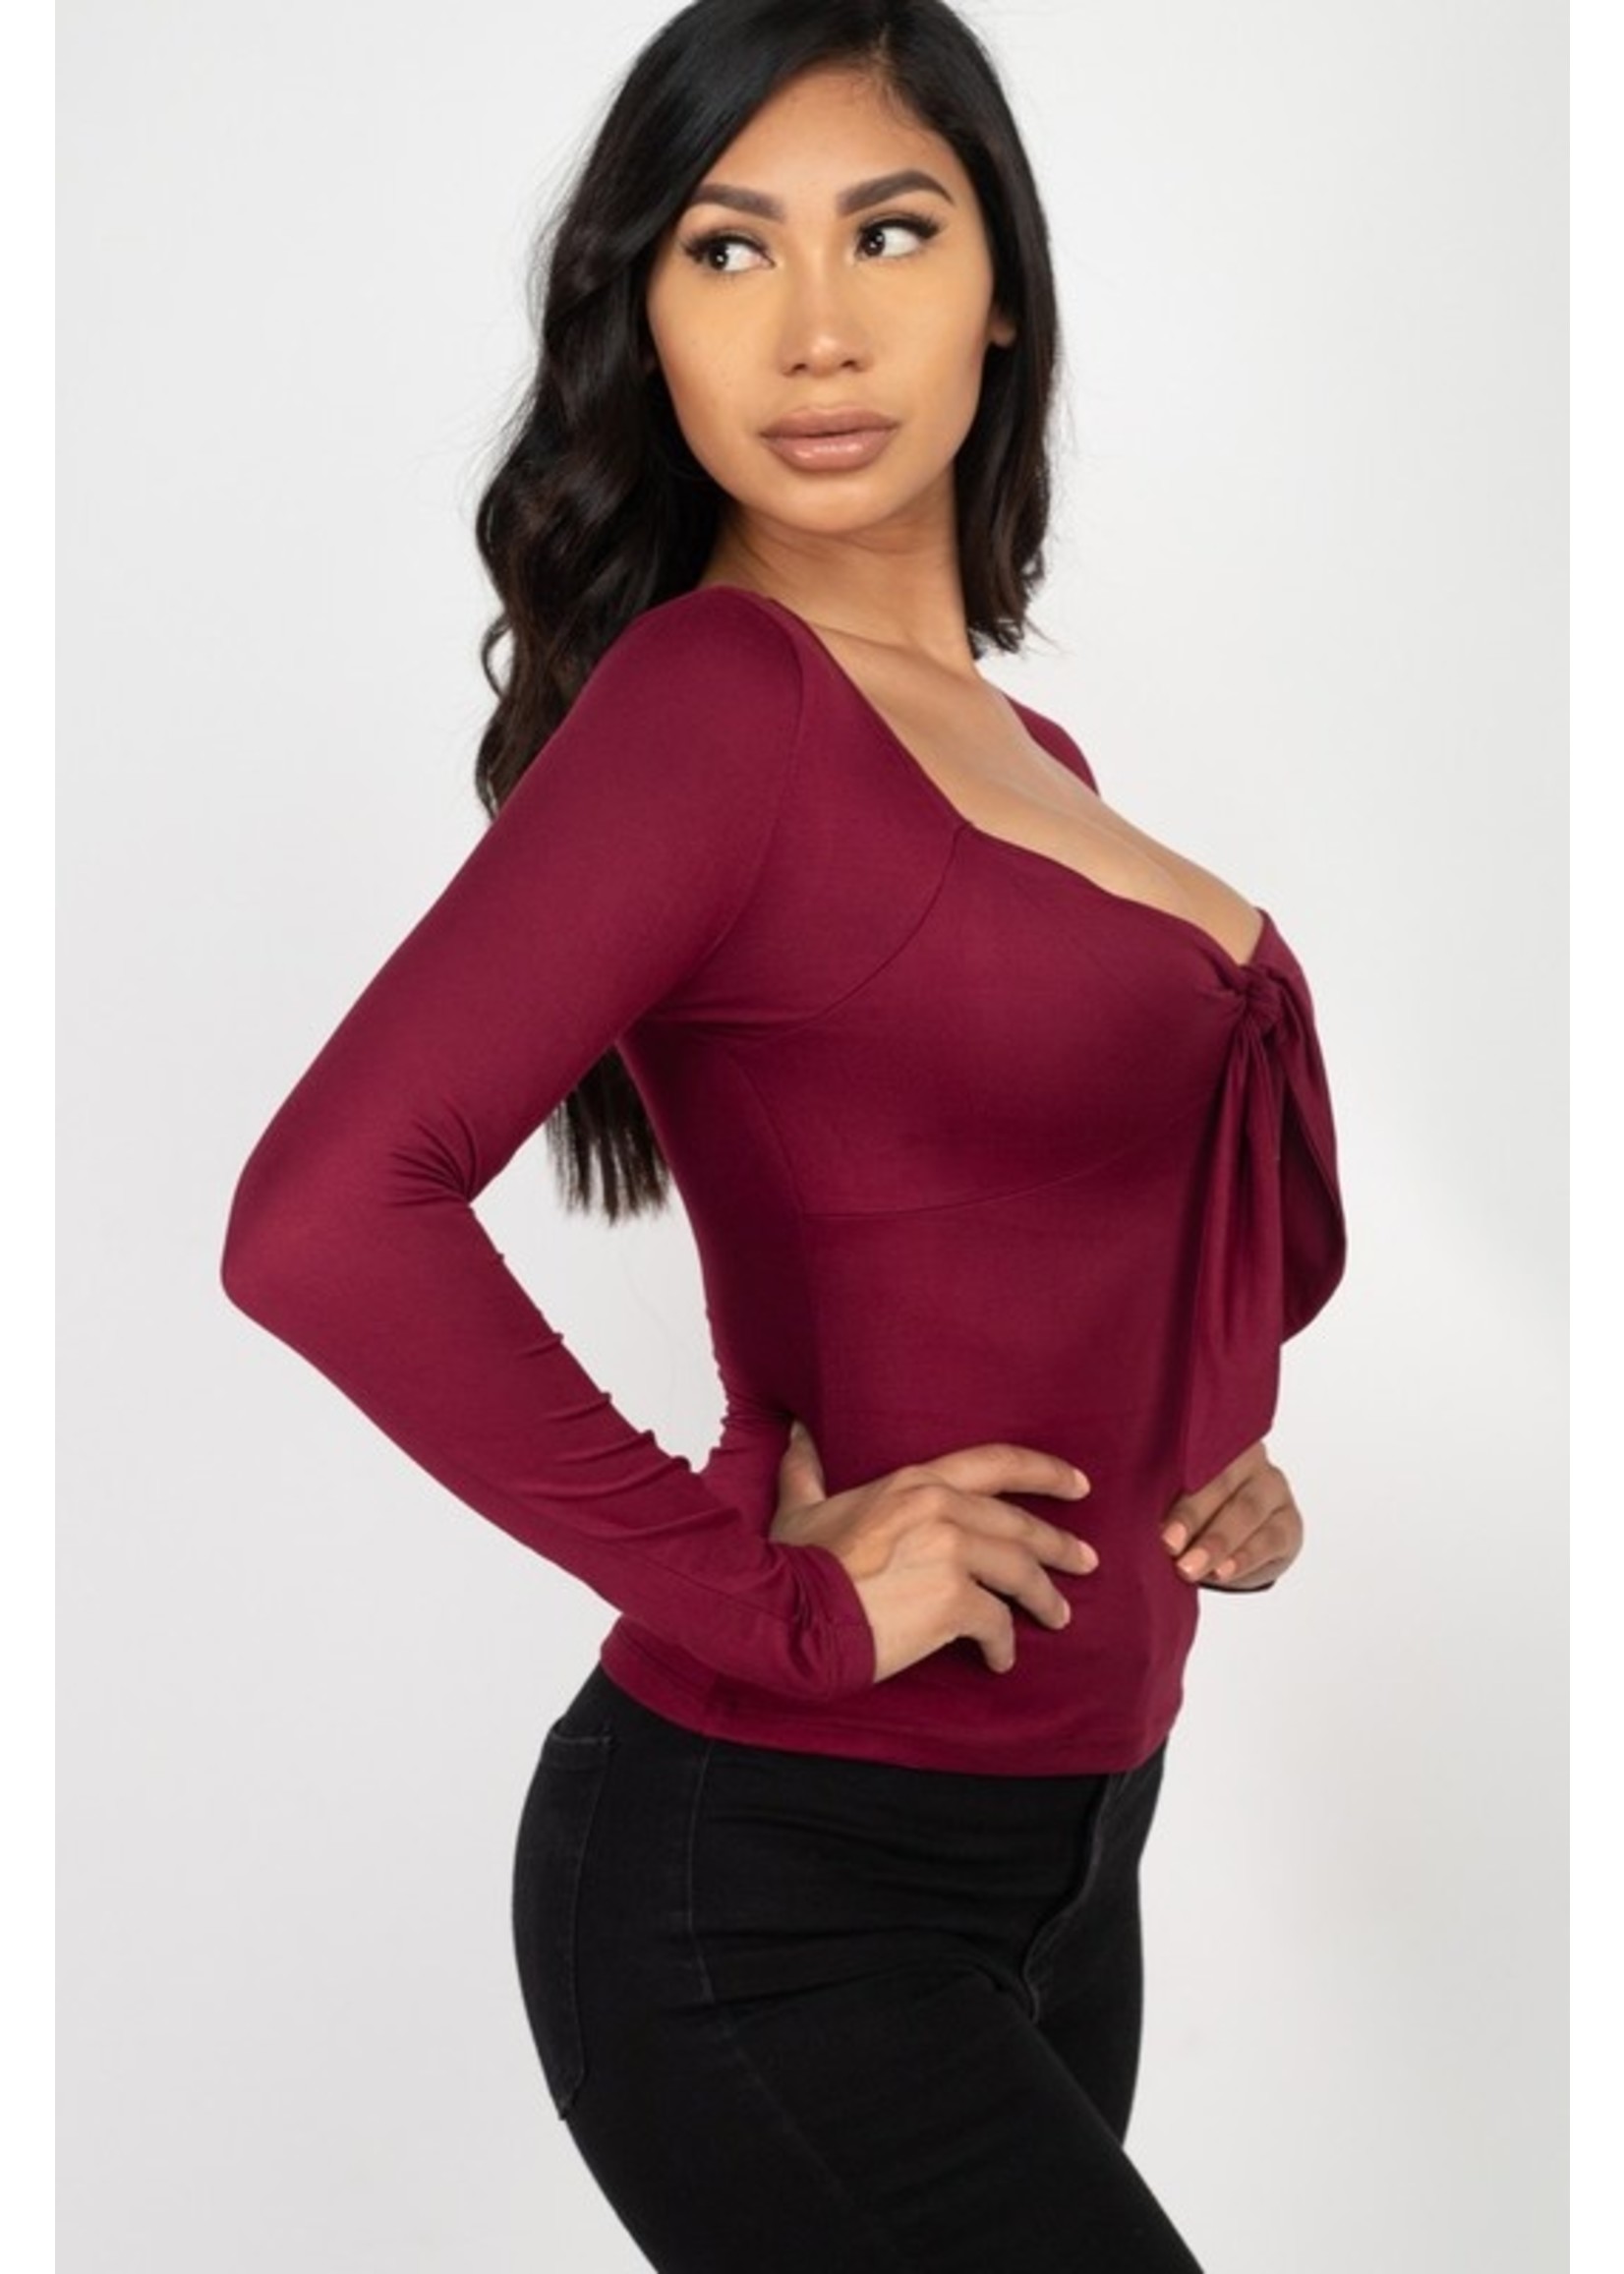 Capella Sincerely Yours Top Burgundy